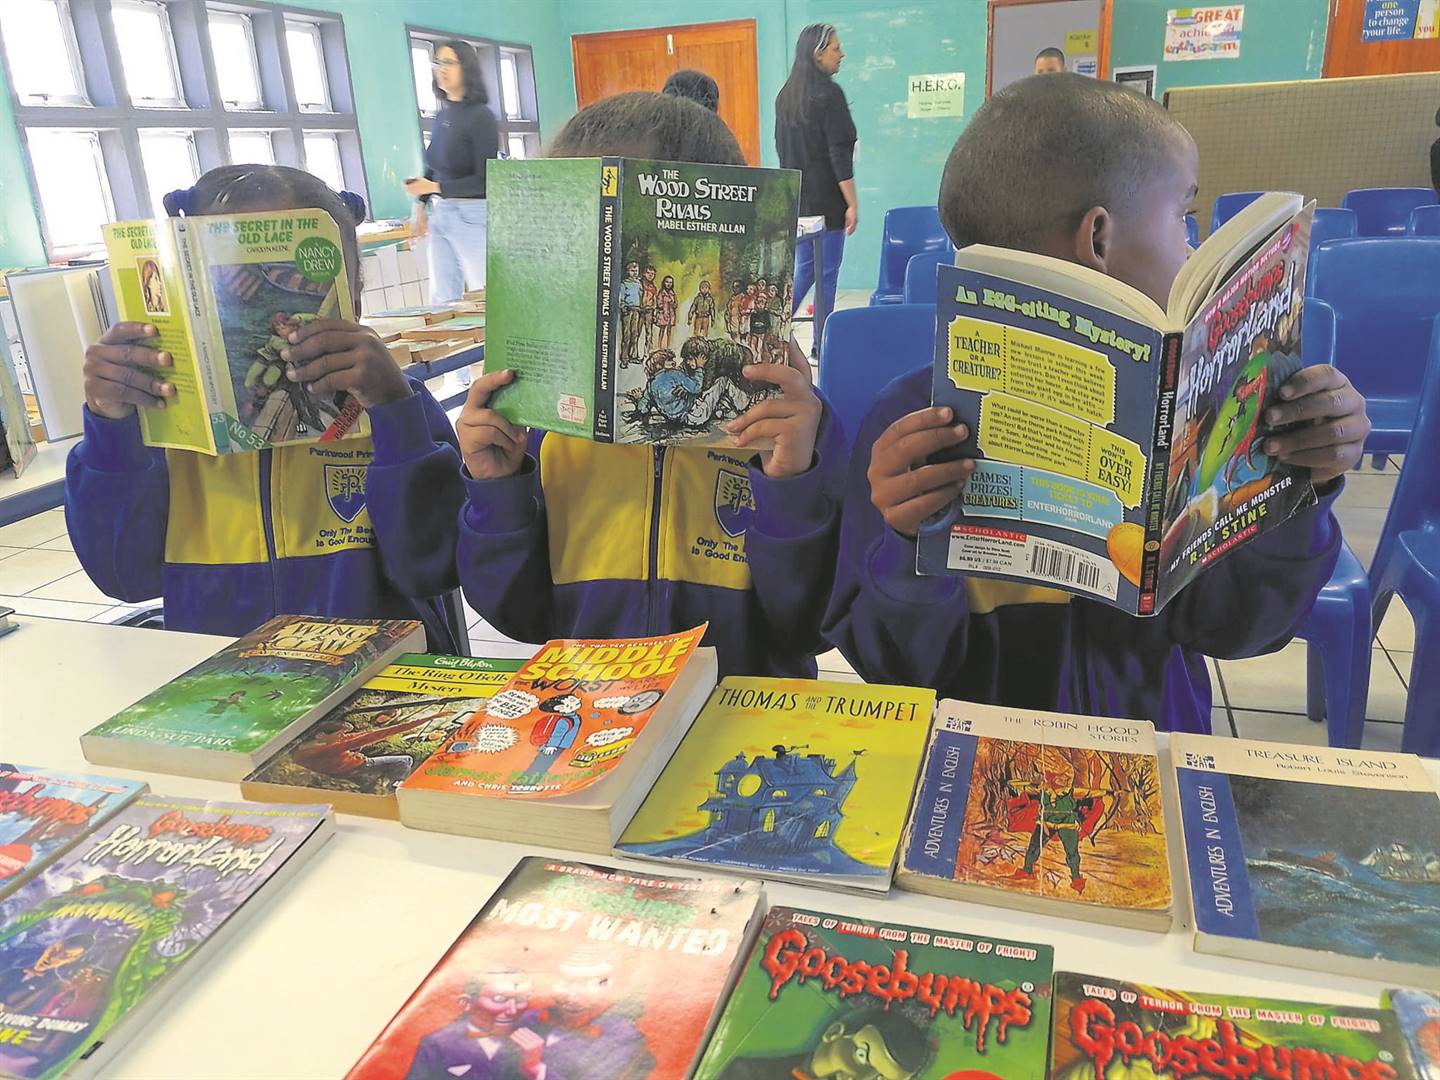 Learners browsed through the books that were brought to the school by NPO Rescue A Young Life. PHOTOS: Natasha Bezuidenhout